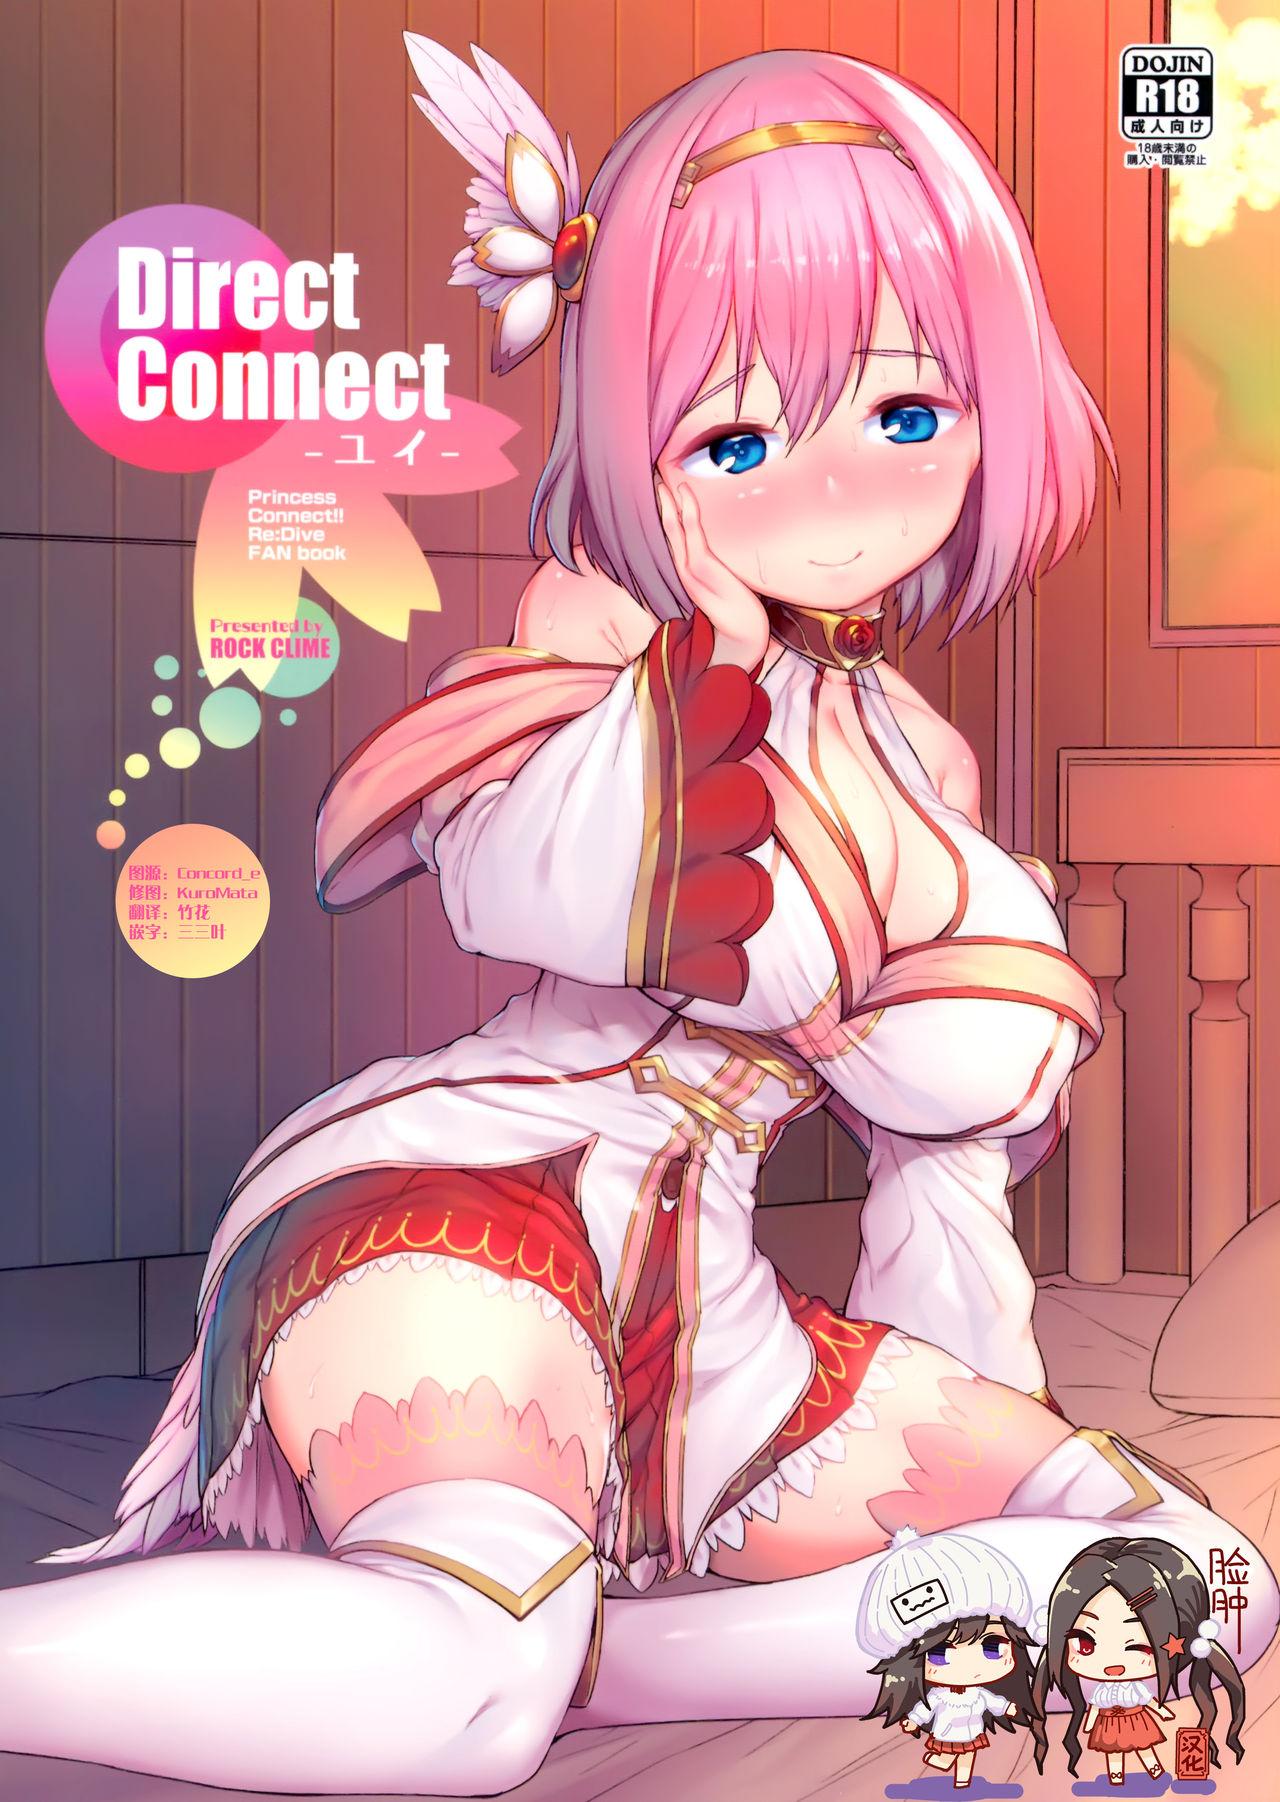 Vaginal Direct Connect - Princess connect Erotica - Page 1